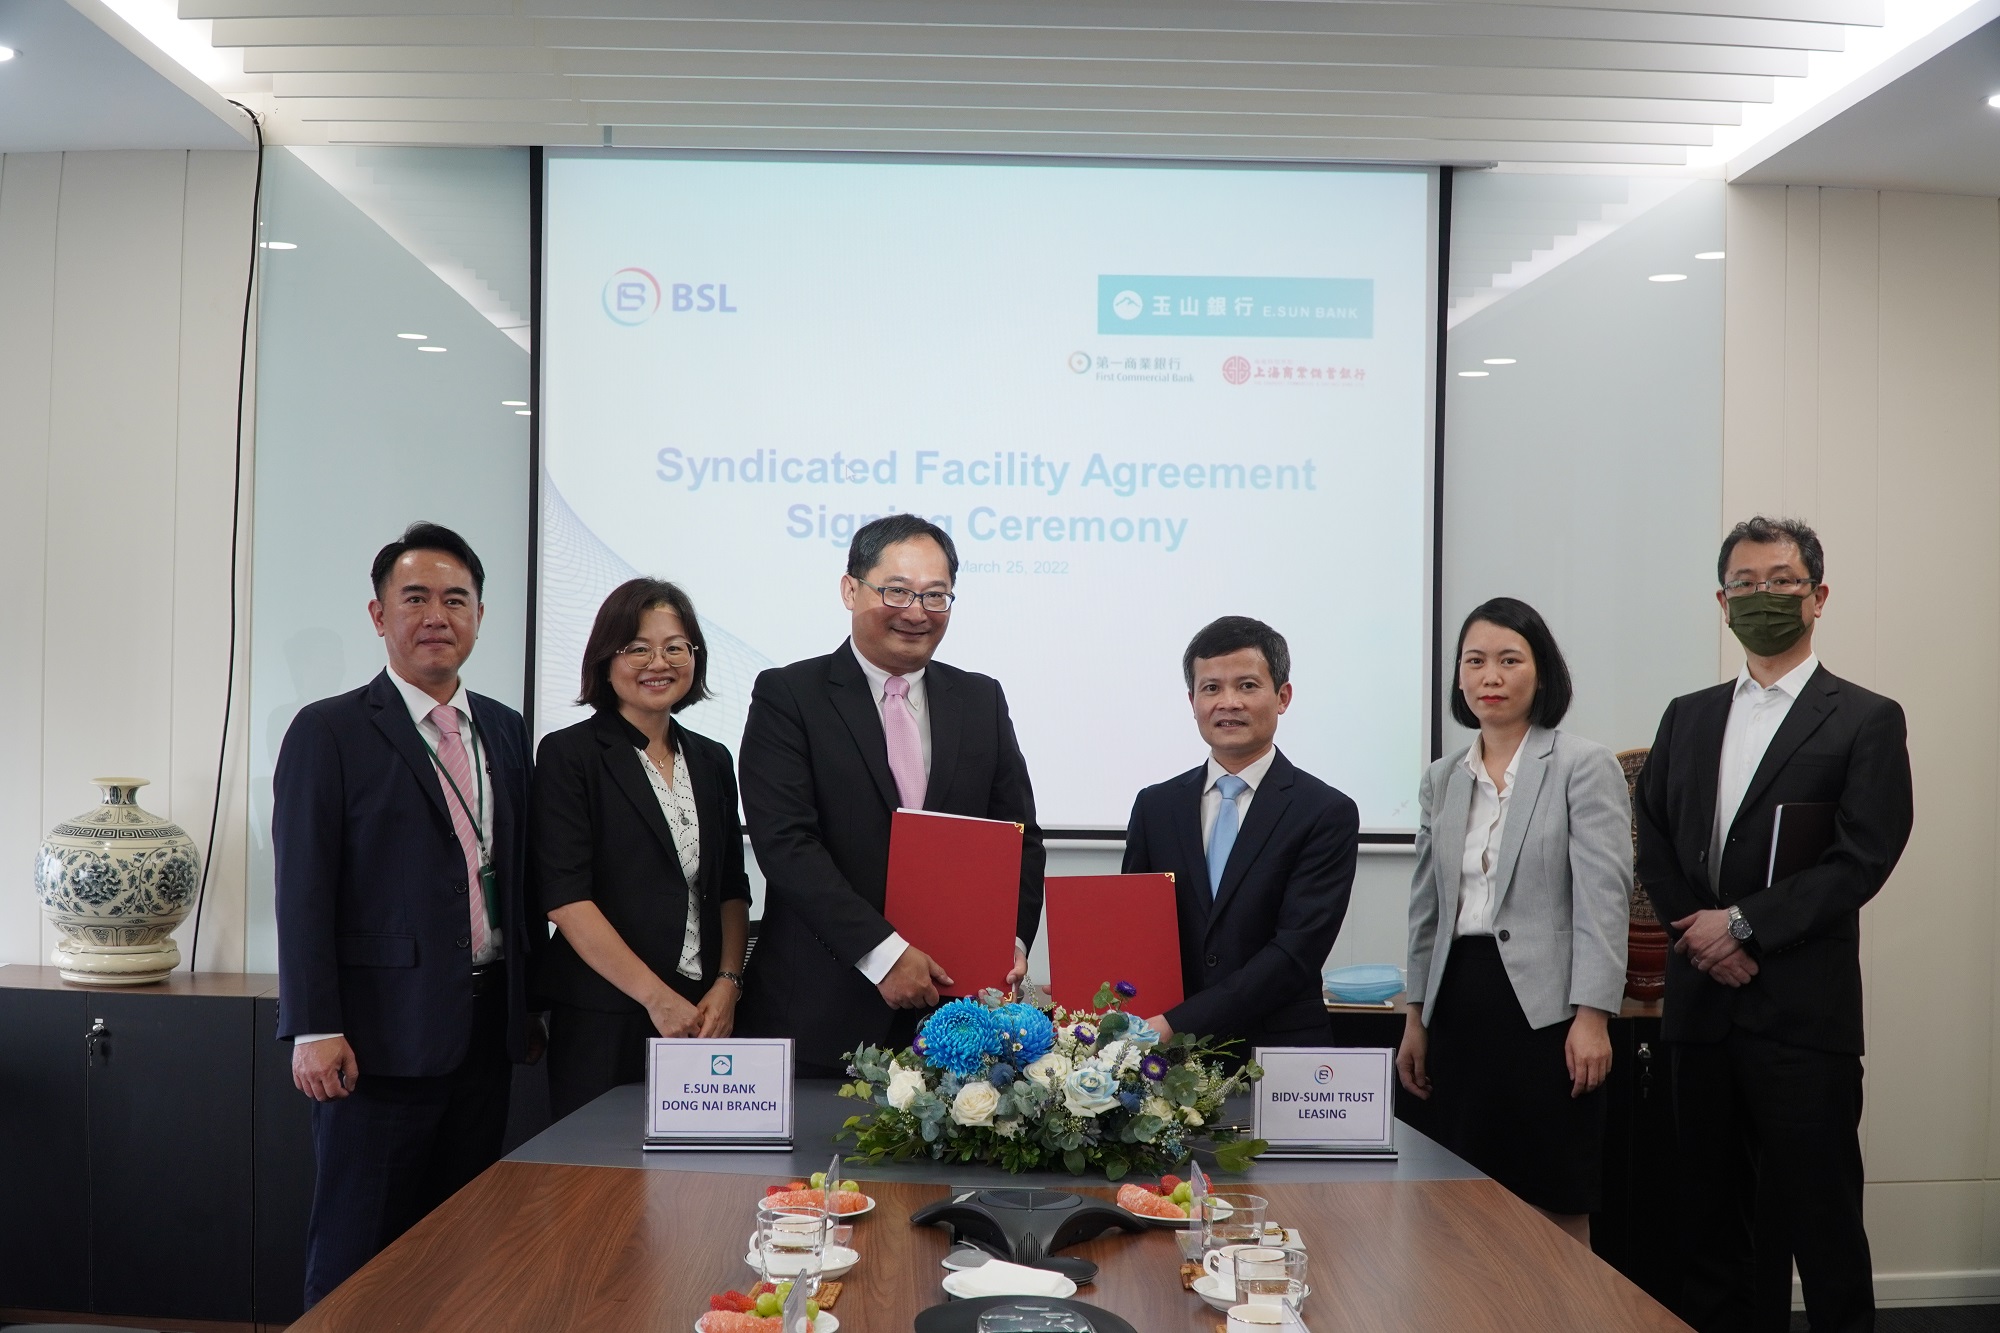 Syndicated Facility Agreement between BIDV-SuMi TRUST Leasing (BSL) and three branches of foreign banks in Vietnam